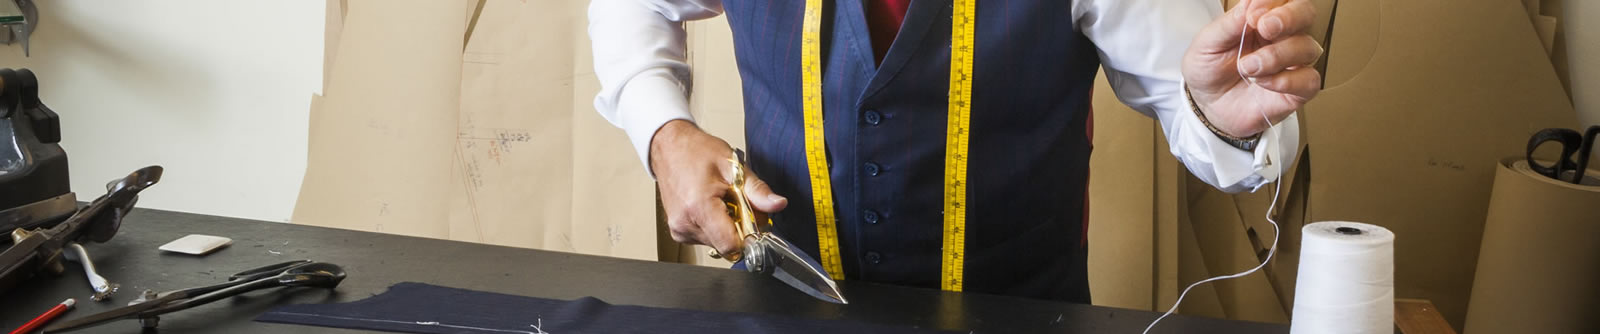 Consultation & Measurements - Made-To-Measure Tailoring from